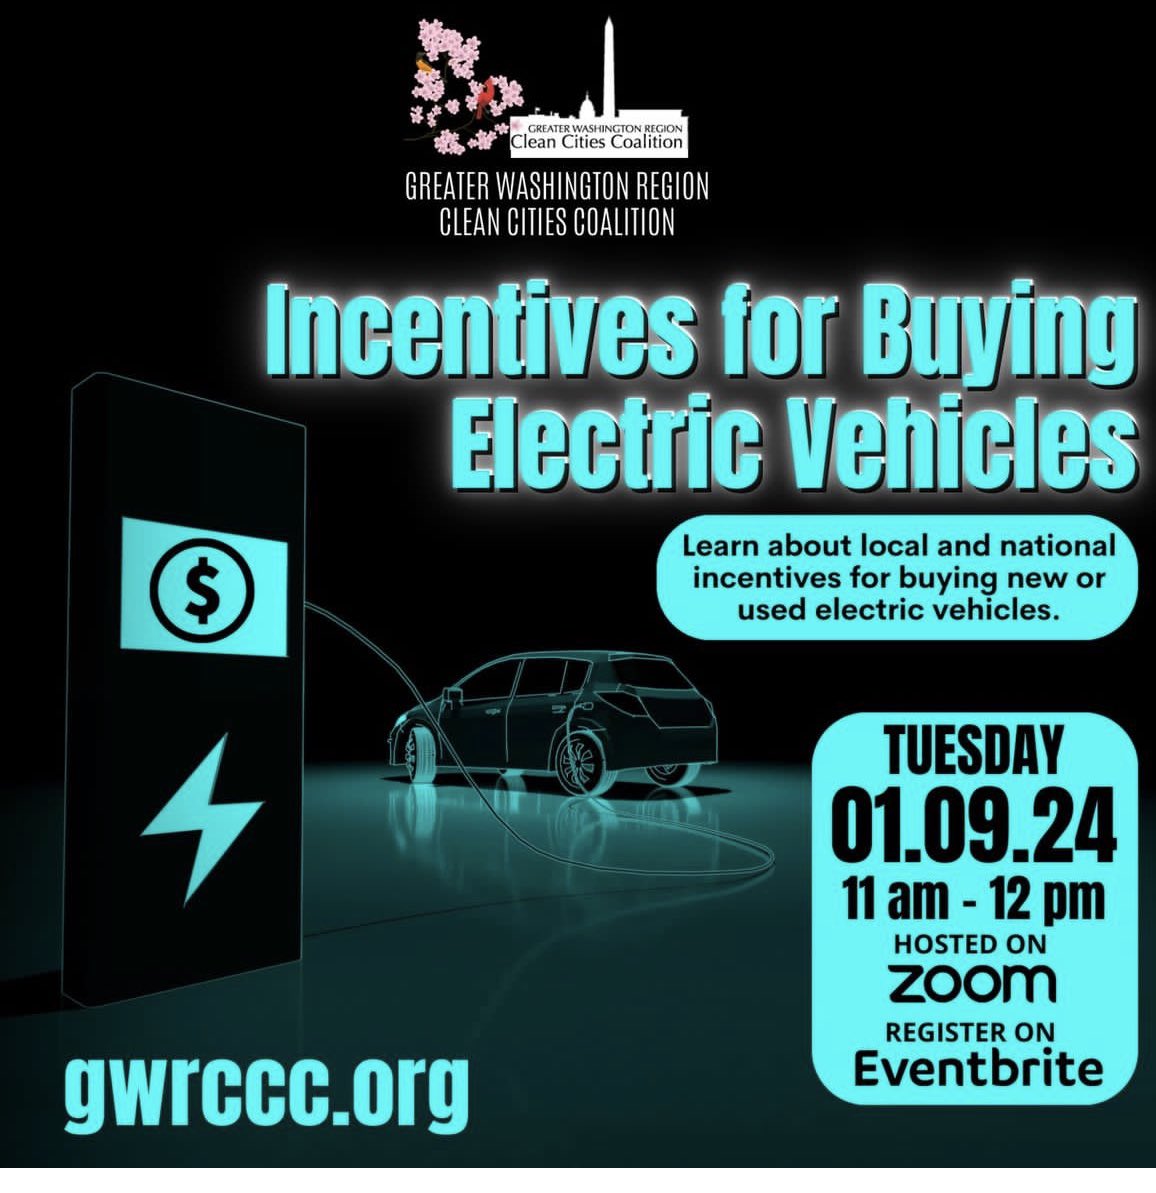 Learn how you can save money on new and used electric vehicles at the Incentives for Buying Electric Vehicles Webinar coming up on January 9 at 11 AM via Zoom!

Register here: IncentivesforBuyingEVs.eventbrite.com

#GWRCCC #EV #EVIncentive #CleanEnergy #CleanTransportation